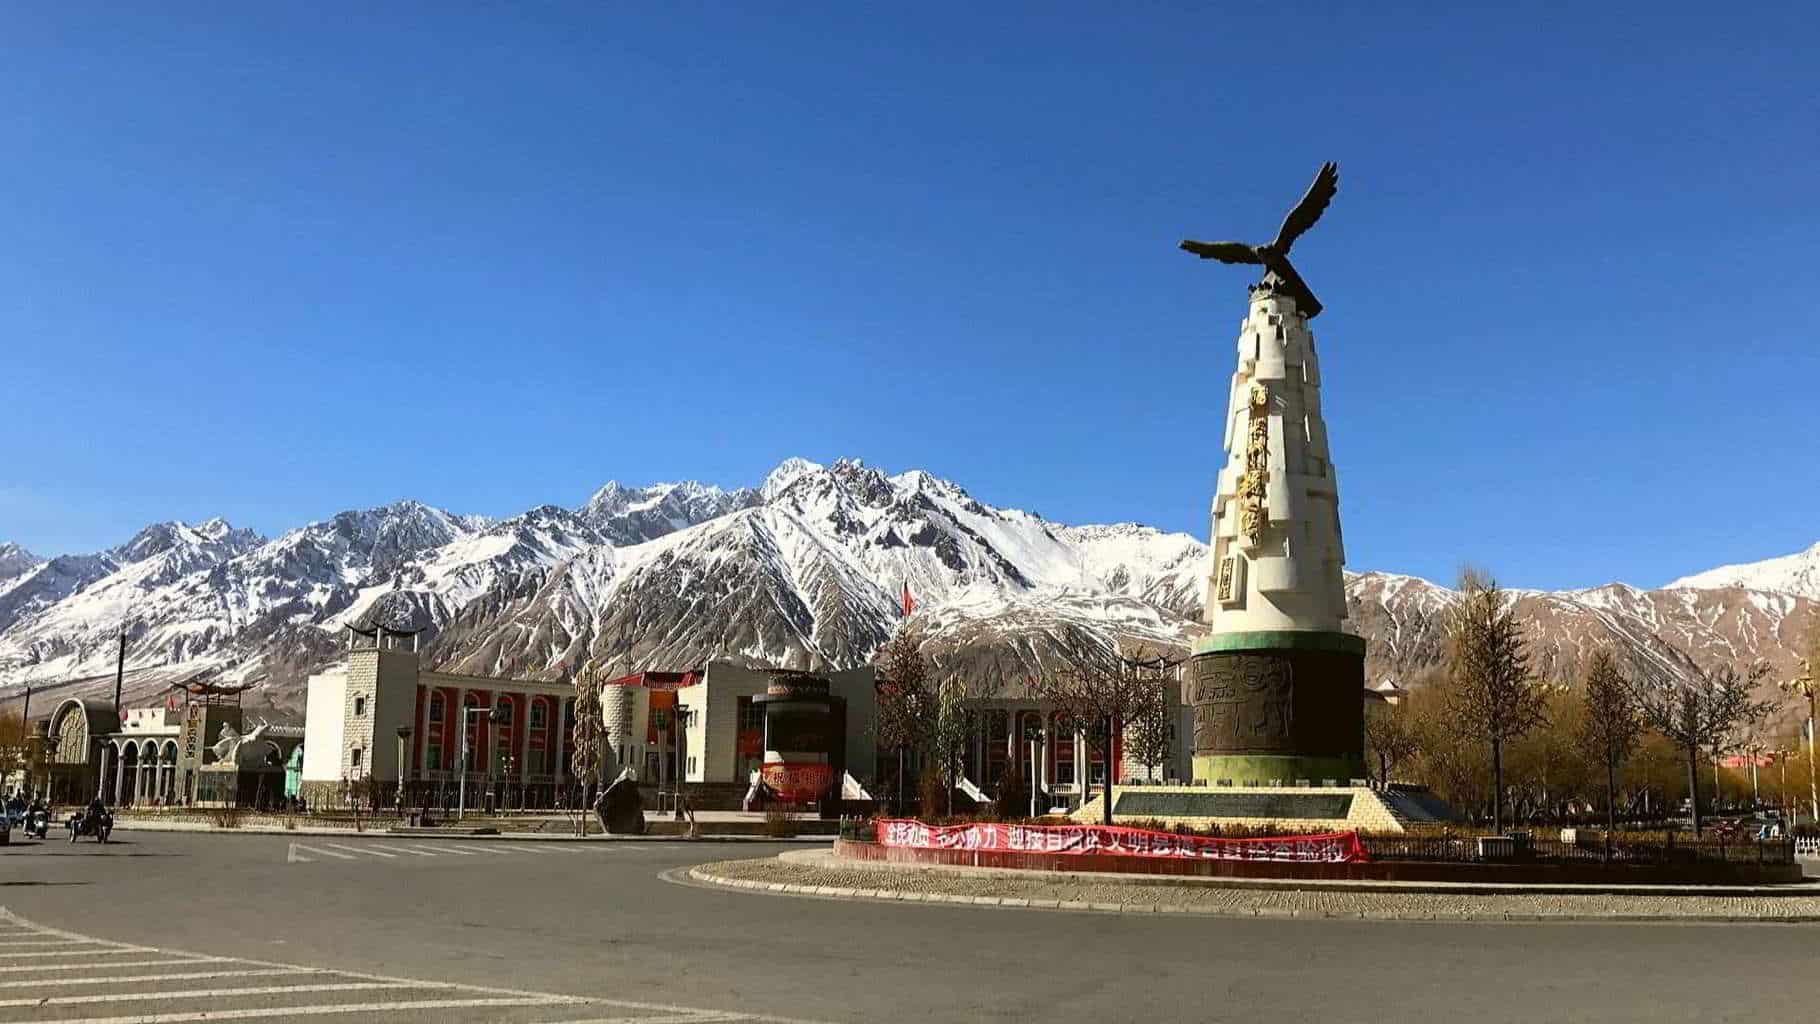 the Flying Eagle monument in the centre of Tashkurgan west china